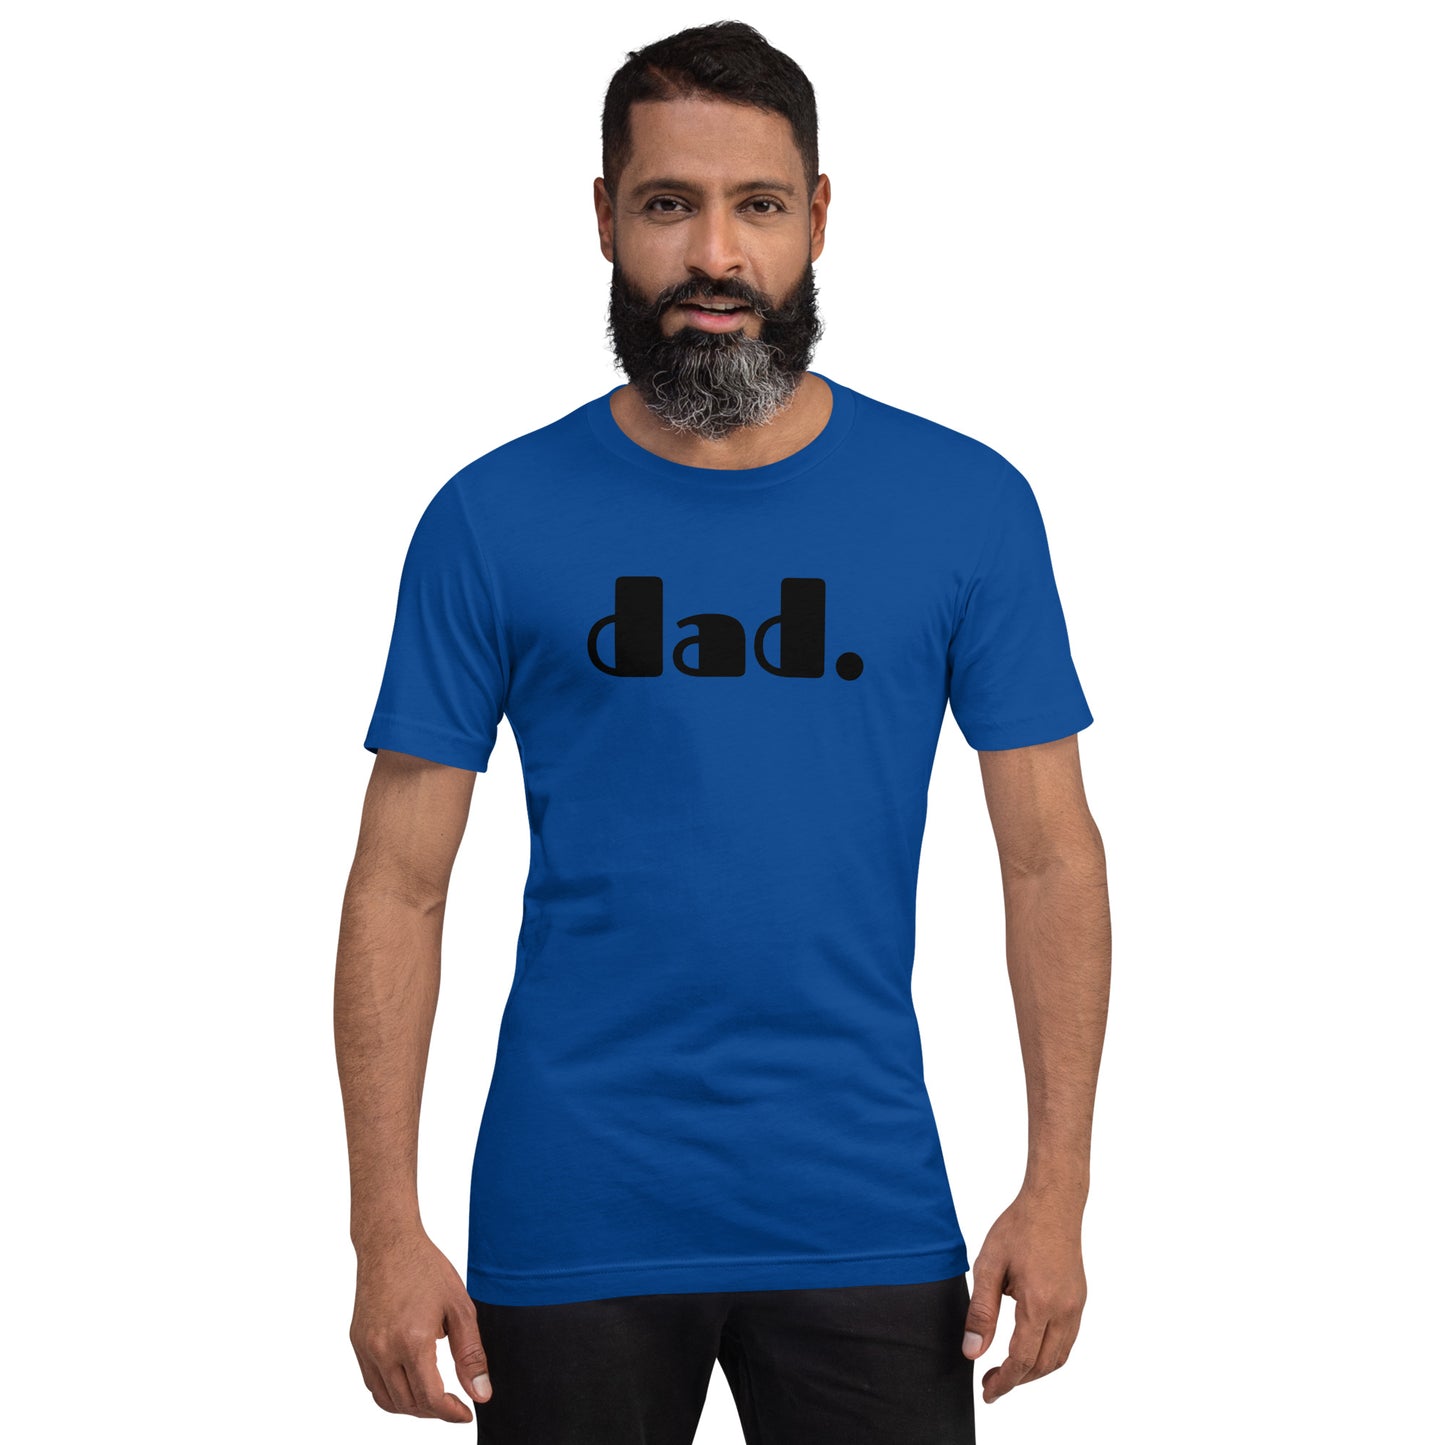 Dad T-Shirt, Father's Day Shirt